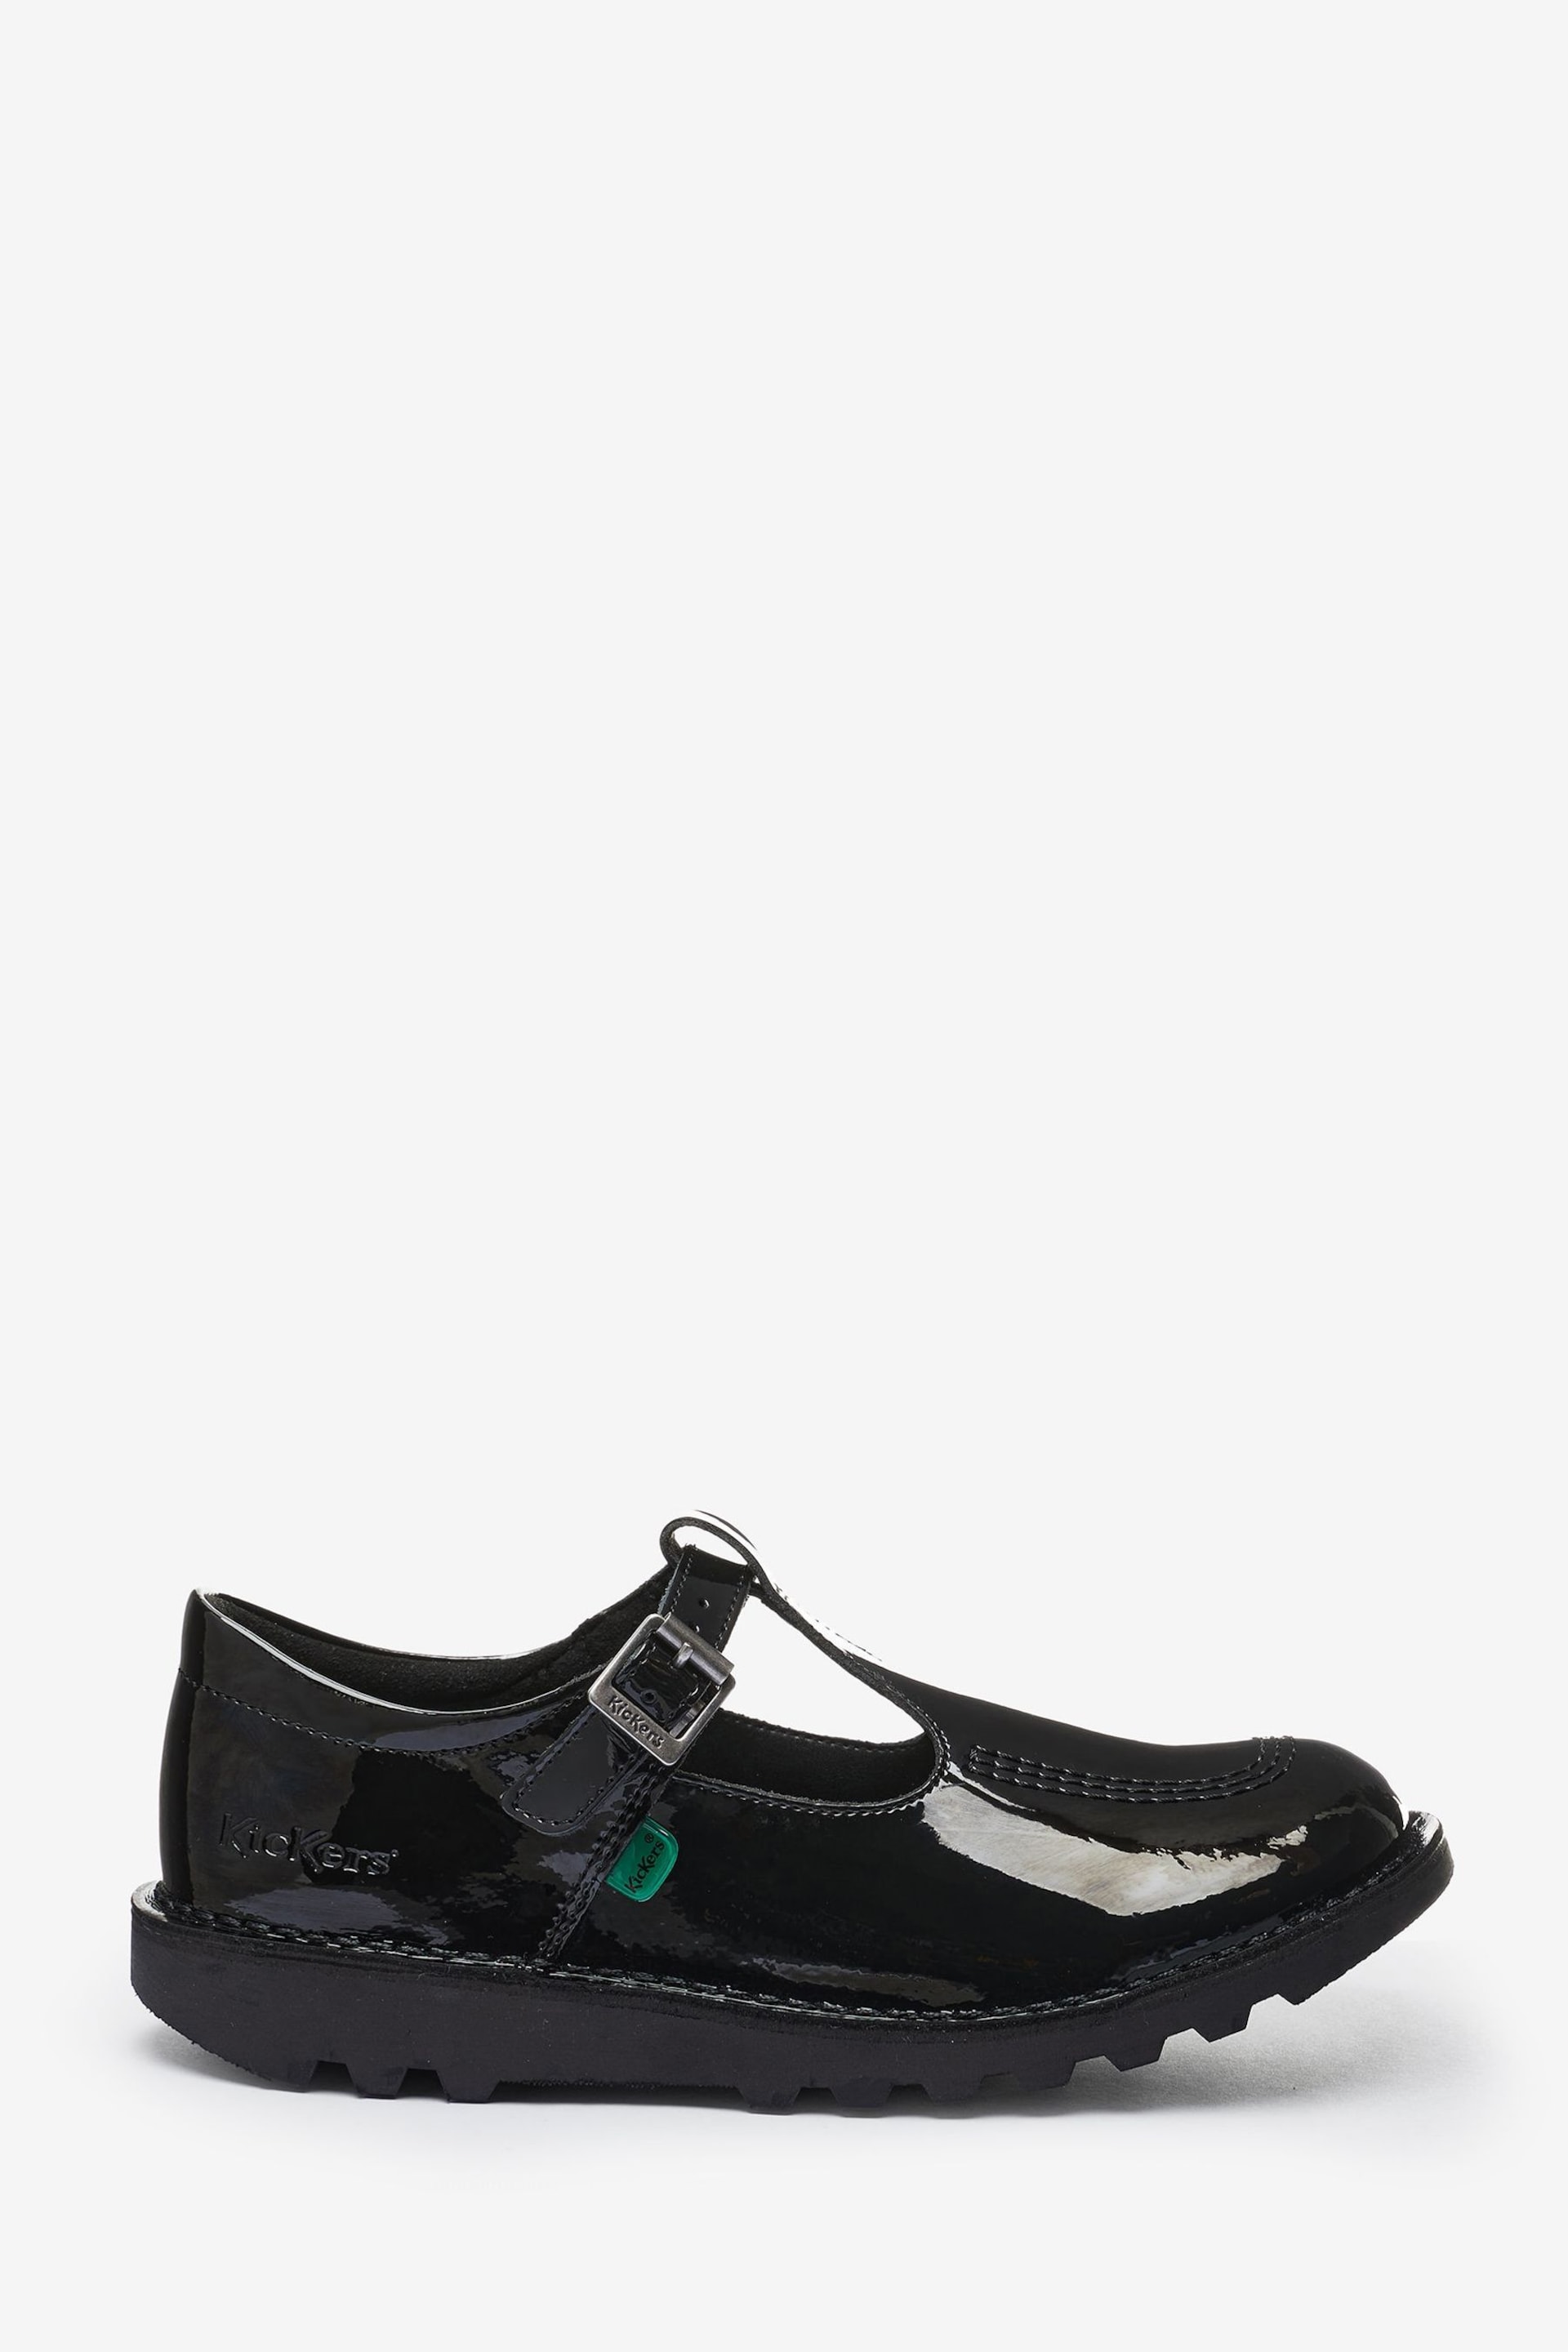 Kickers Youth Patent Leather Kick Black Shoes - Image 1 of 4